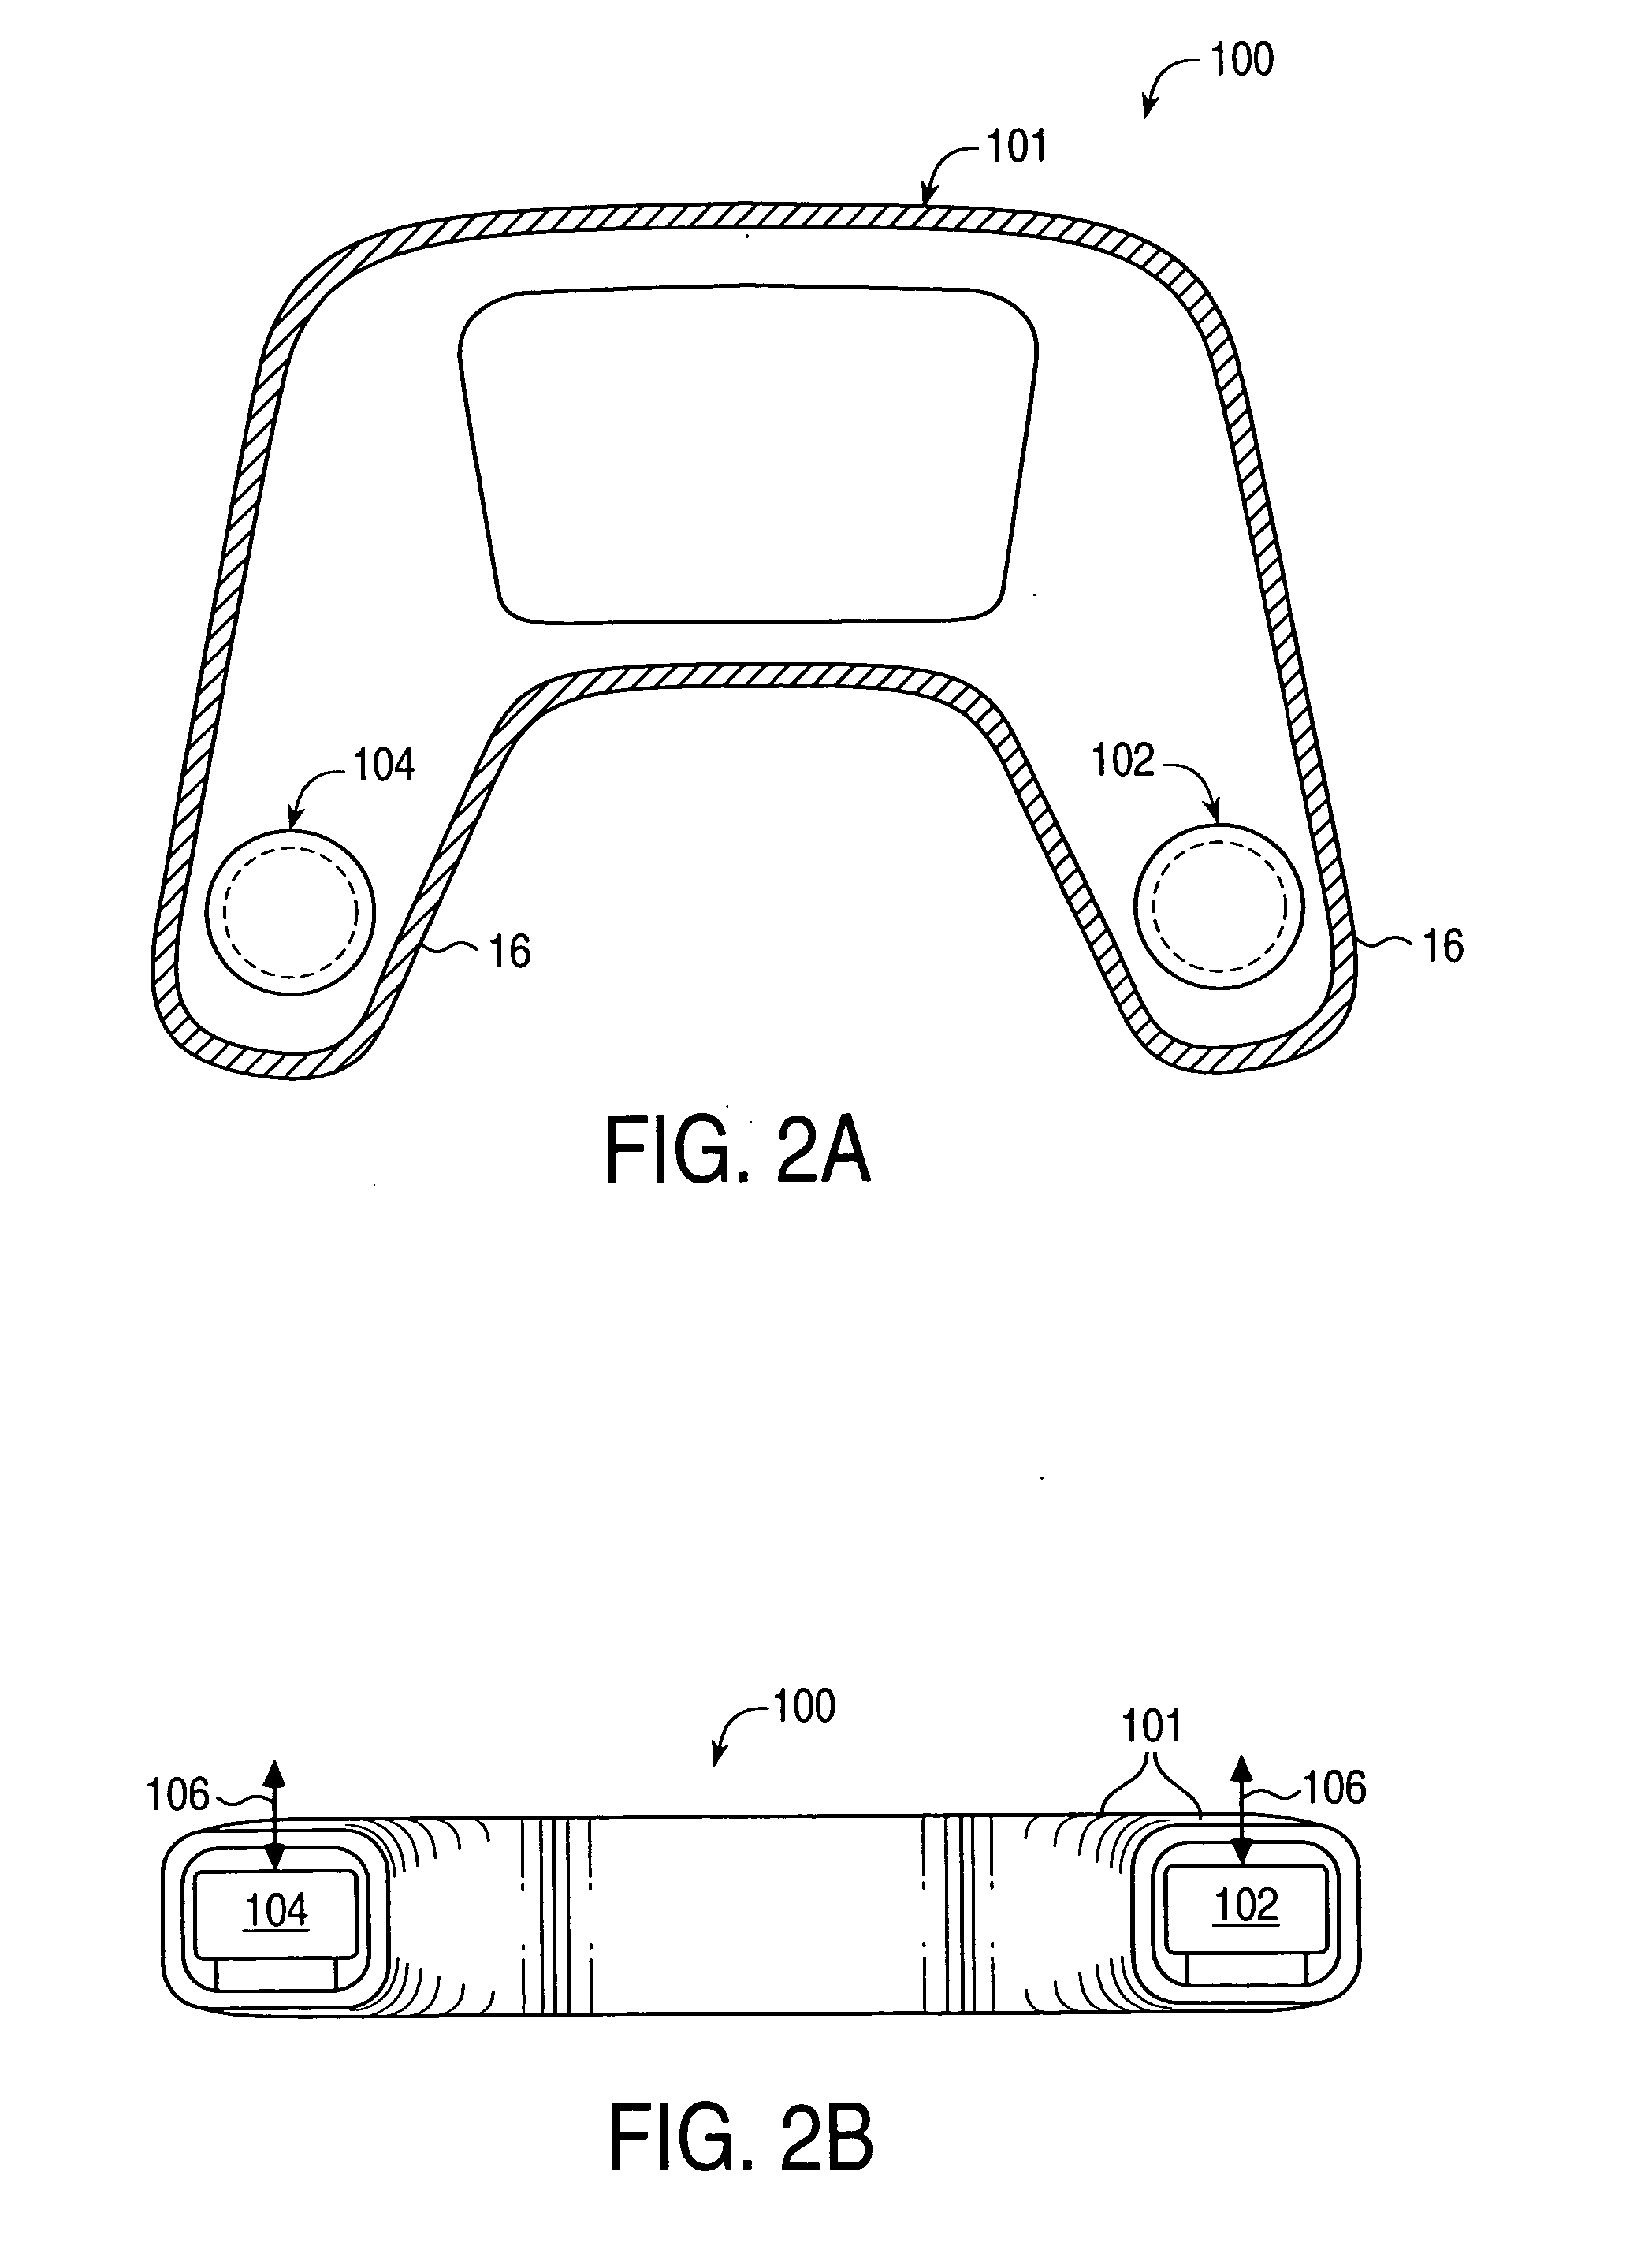 Directional tactile feedback for haptic feedback interface devices